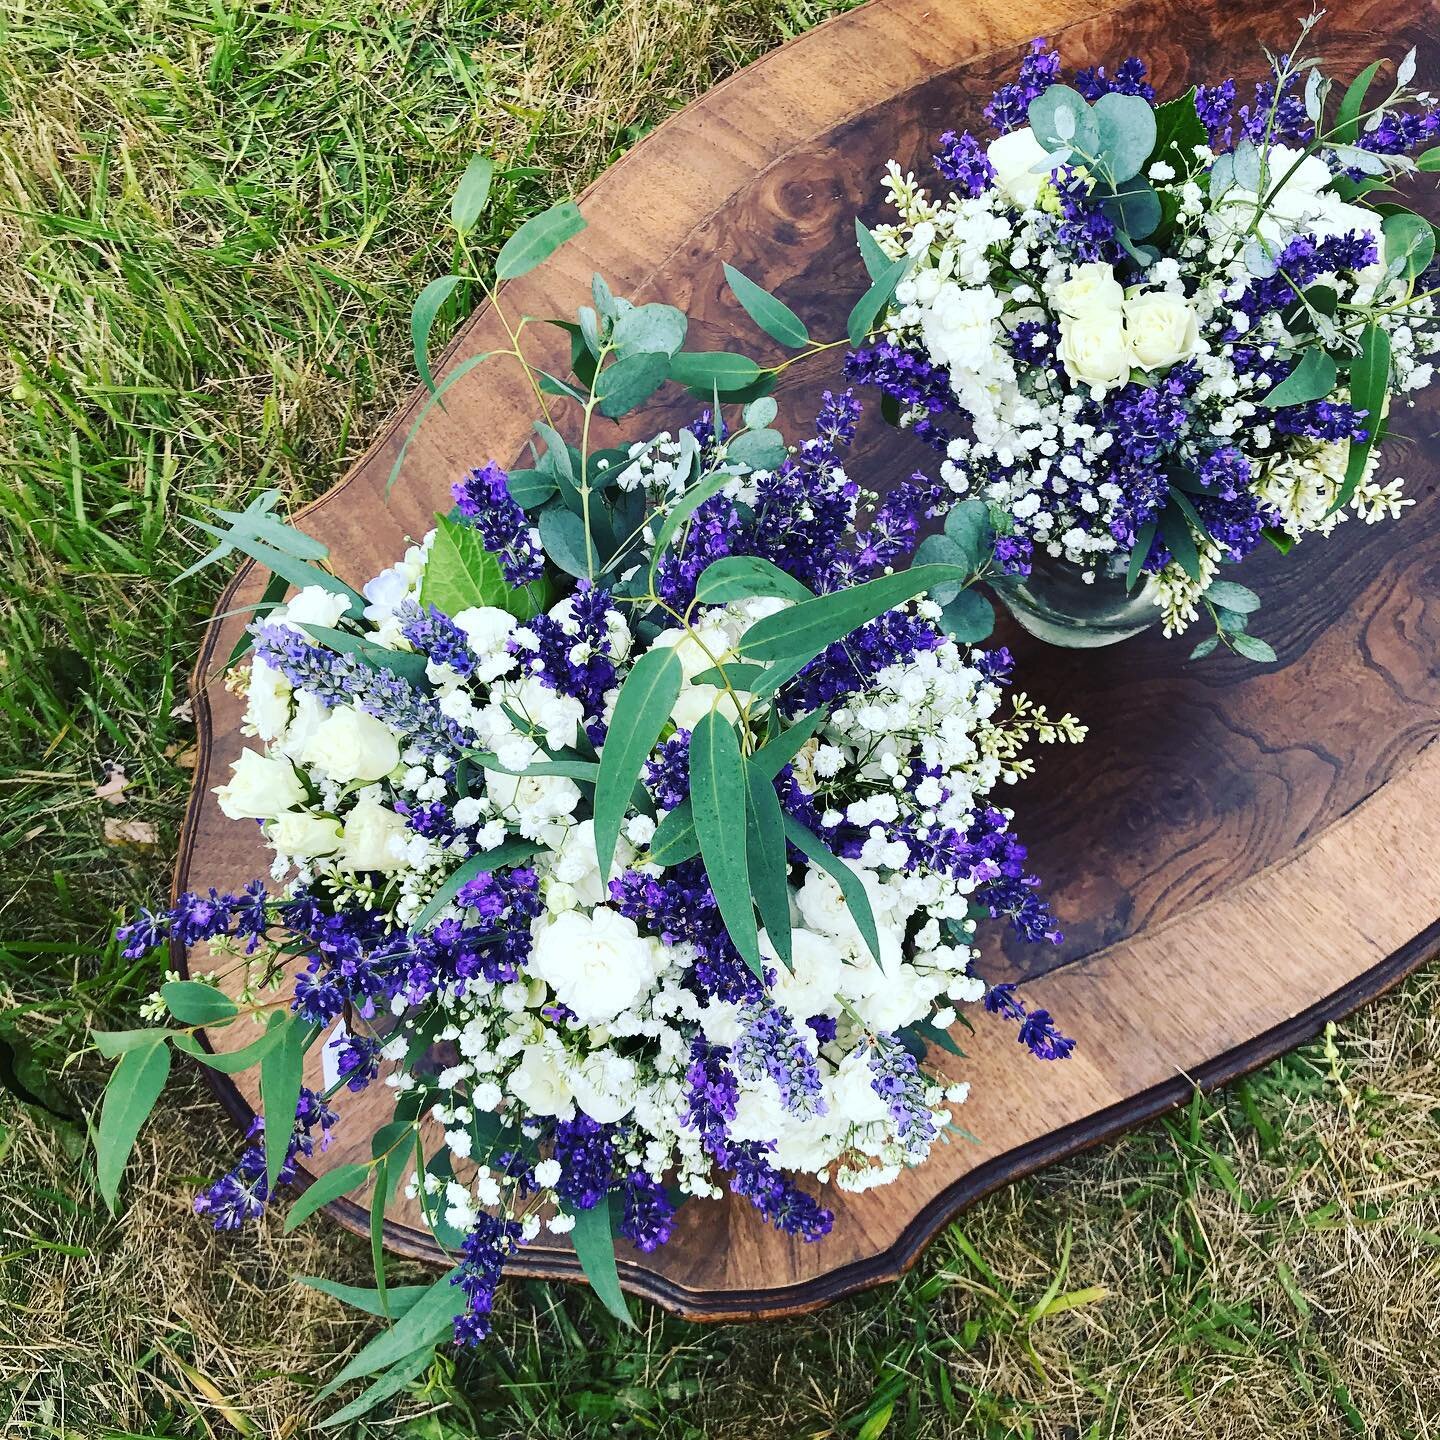 Simple pretty here for an island wedding.  Gathering, styling, crafting joy for a lovely couple getting married in Vashon island in the midst of Covid. 
The last of summer blues. 
#countrypretty  #thisfloweringlife #mustmakepretty #covidwedding2020 #